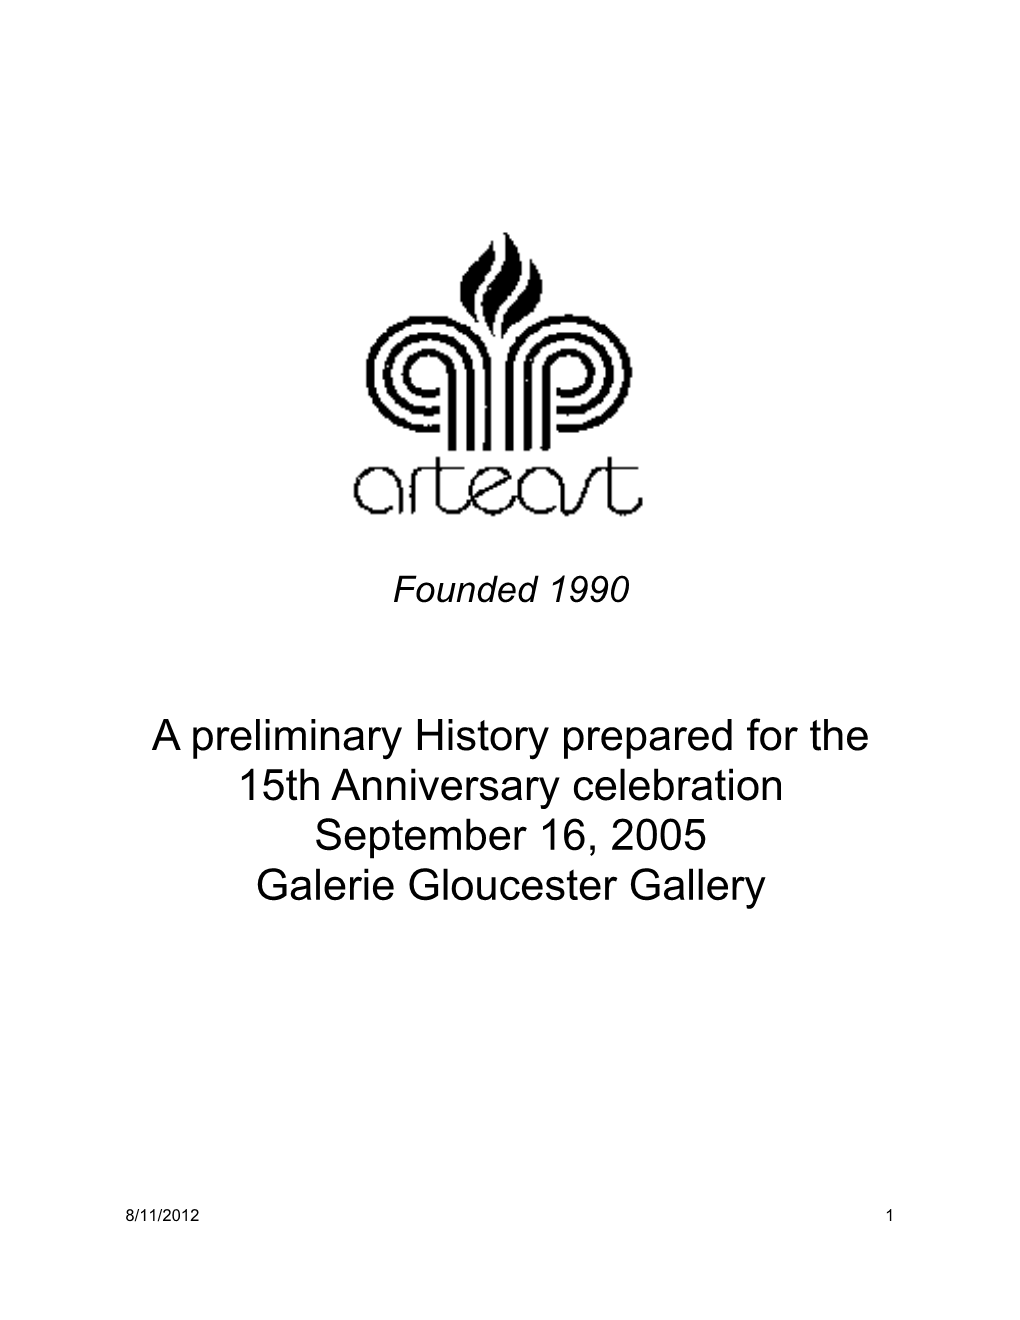 A Preliminary History Prepared for the 15Th Anniversary Celebration September 16, 2005 Galerie Gloucester Gallery